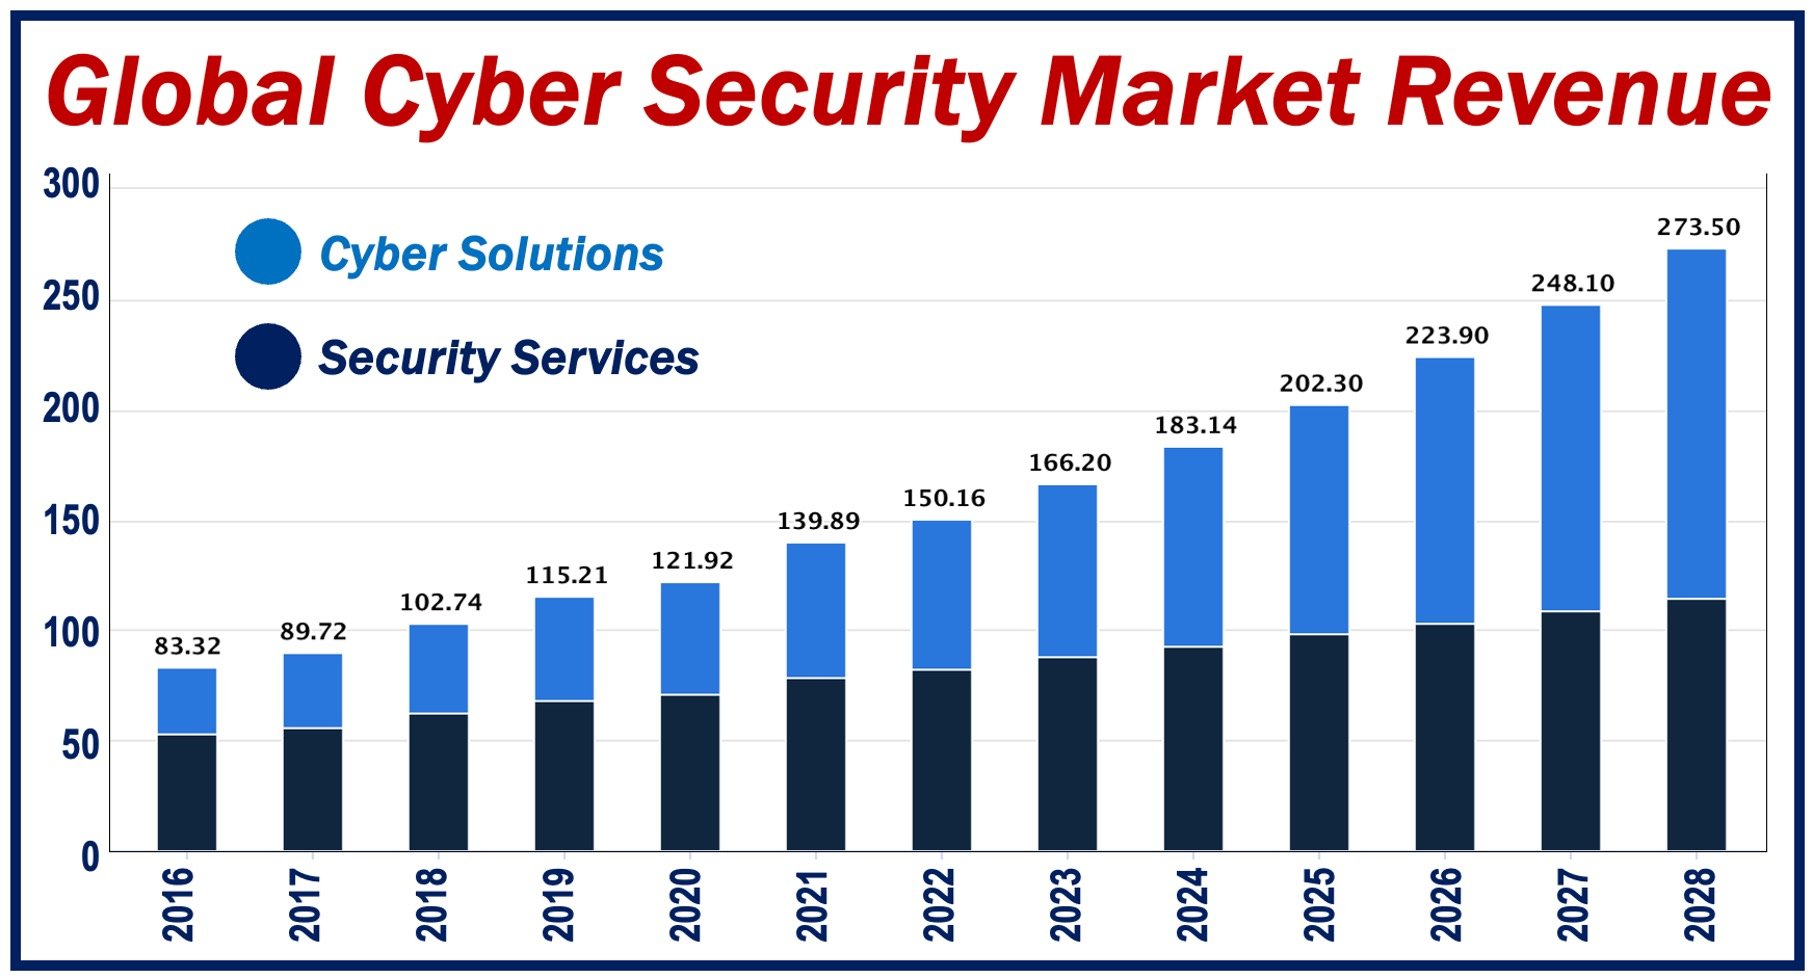 Graph showing Global Cyber Security Market 2016 to 2028.